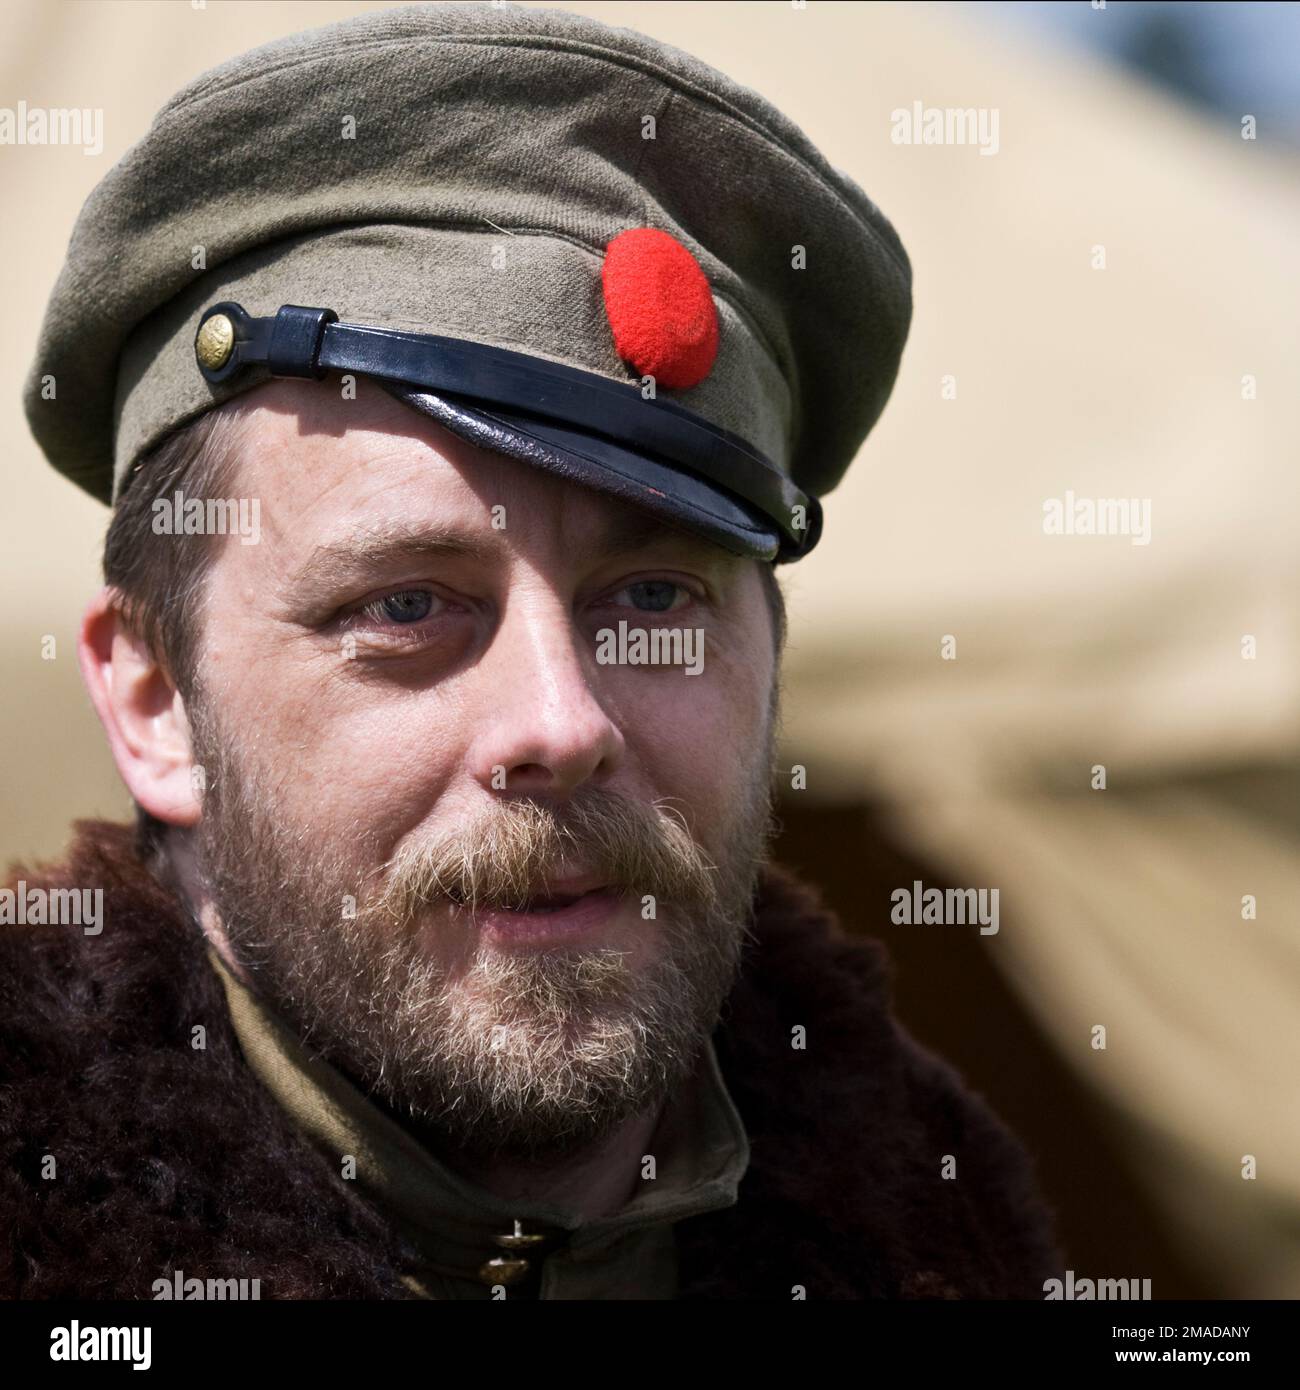 Soldier of the Imperial Russian Army Stock Photo